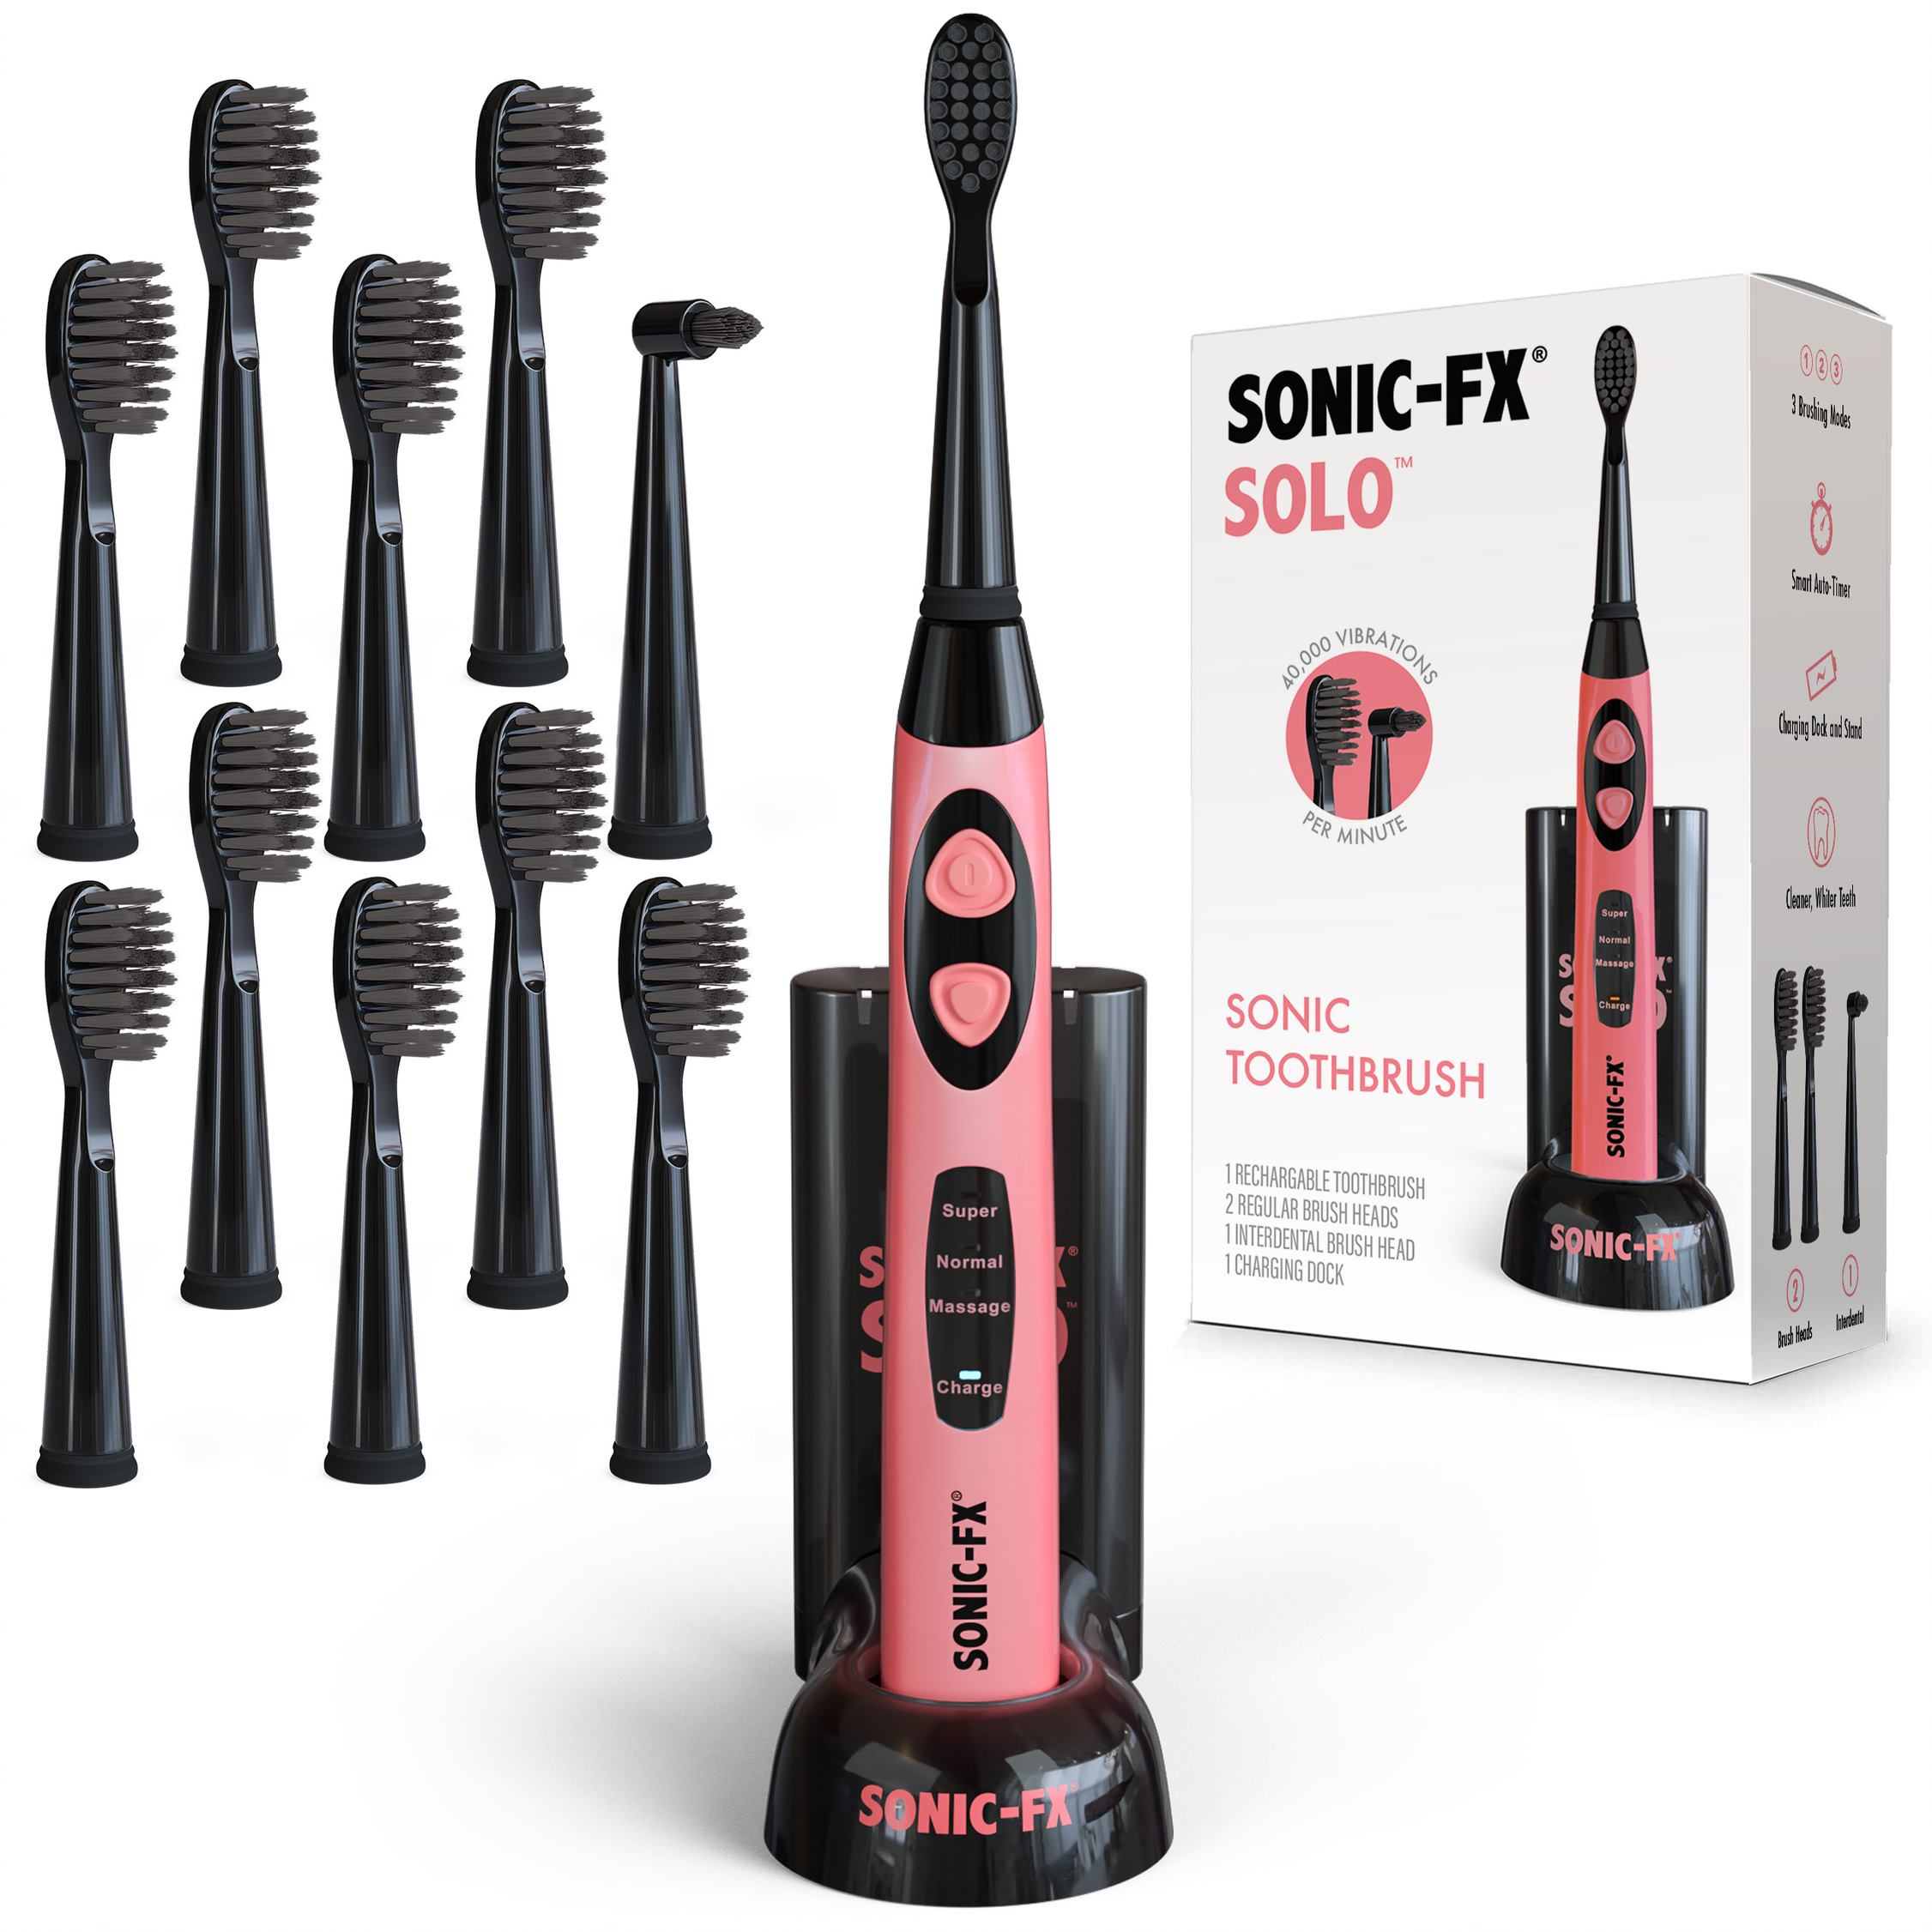 Sonic-FX Solo with 8 Brush Heads in Coral and Black